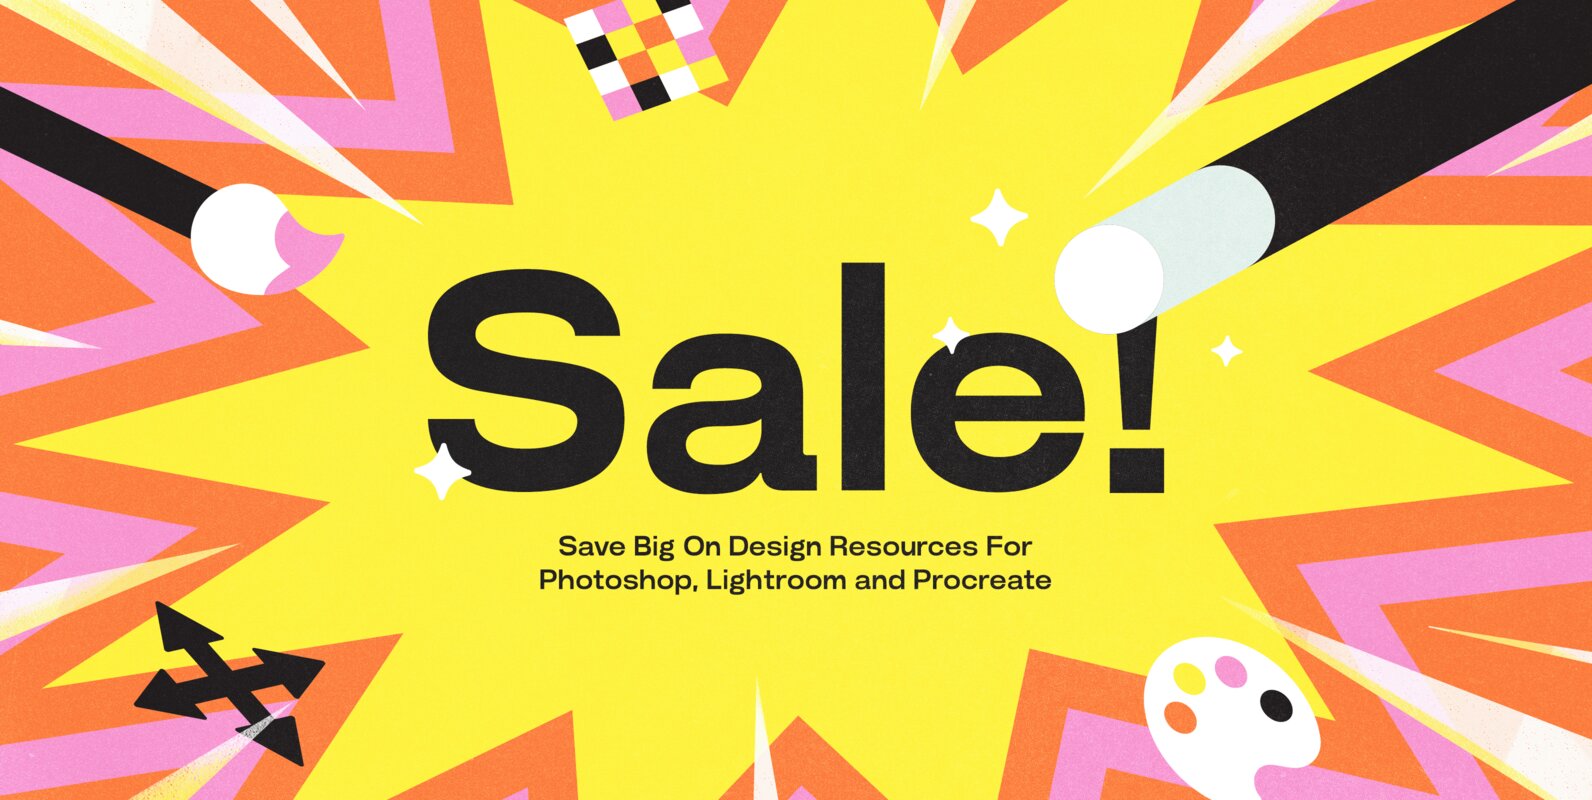 Discounted Tools for Photoshop  Lightroom and Procreate